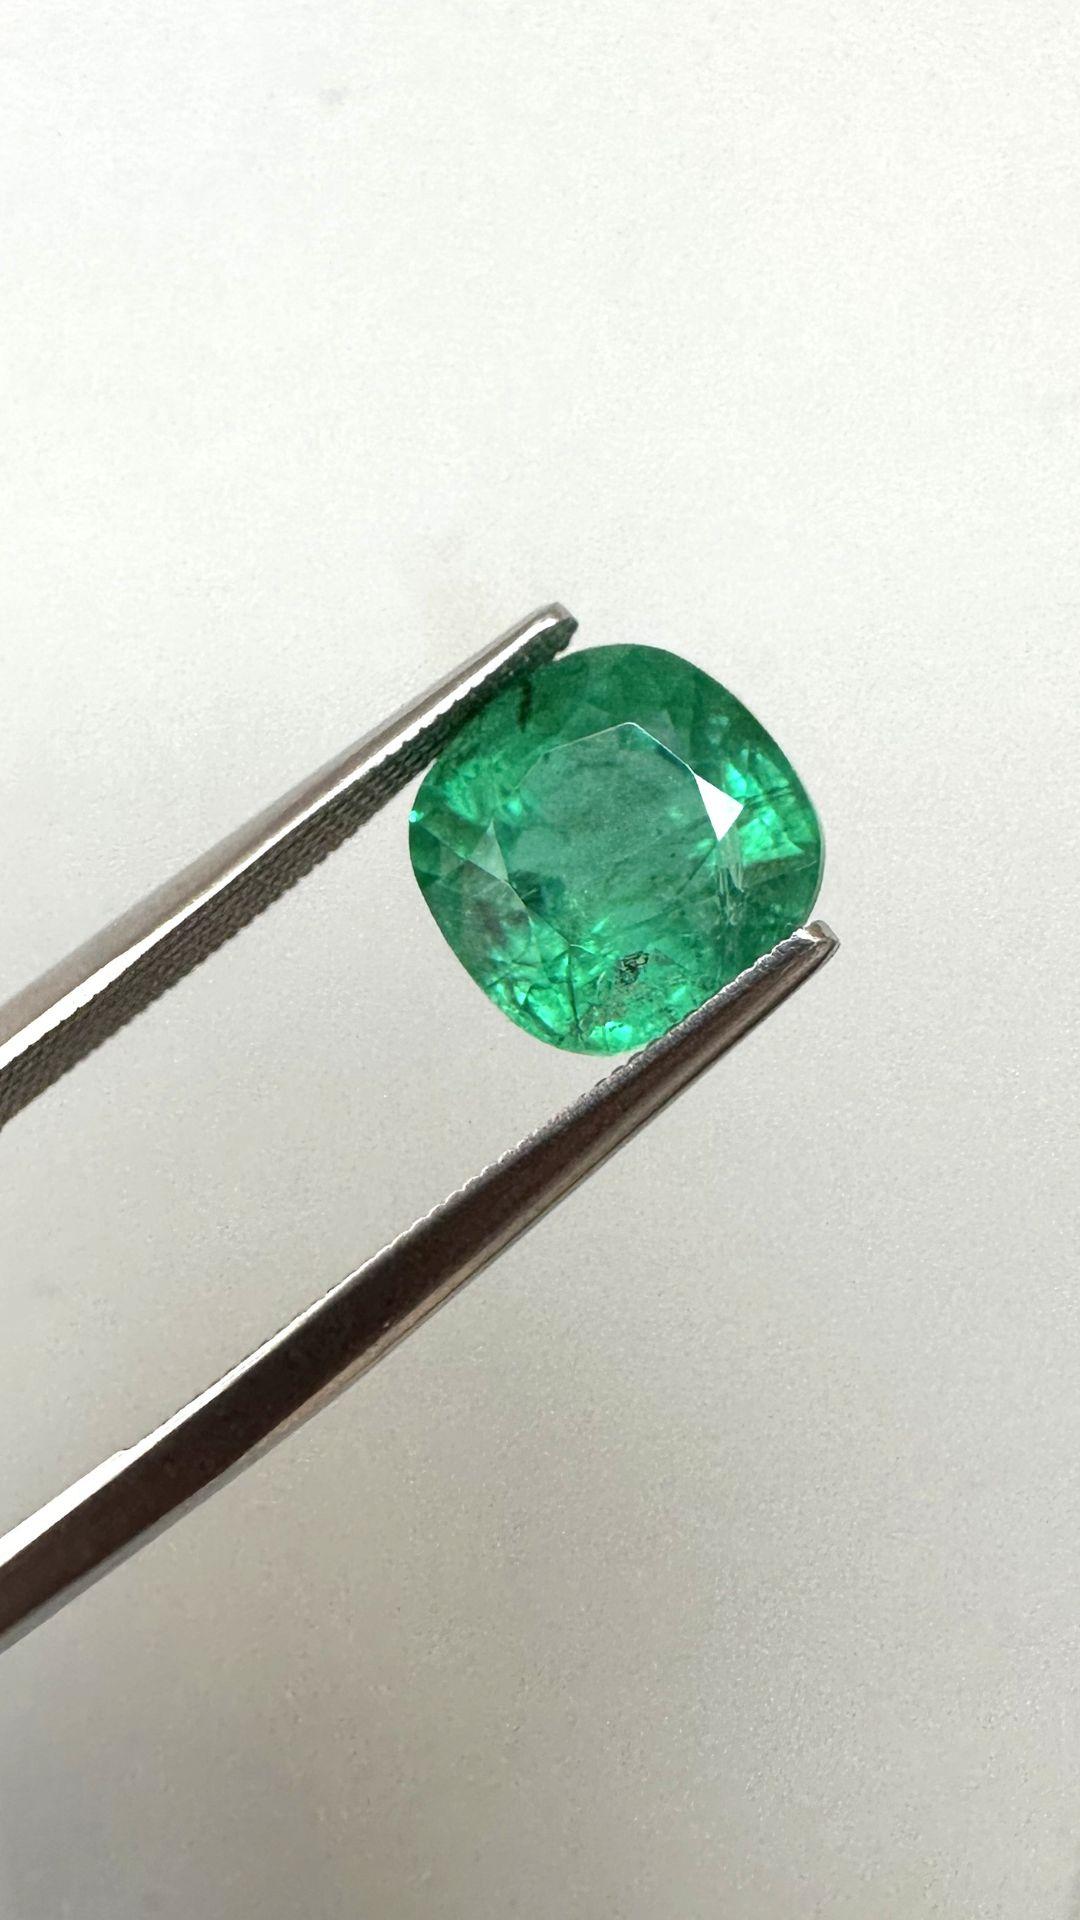 Weight: 4.23 Carats
Size: 9.1x9.1 MM
Pieces: 1
Shape: Cushion Square Faceted Gem 
